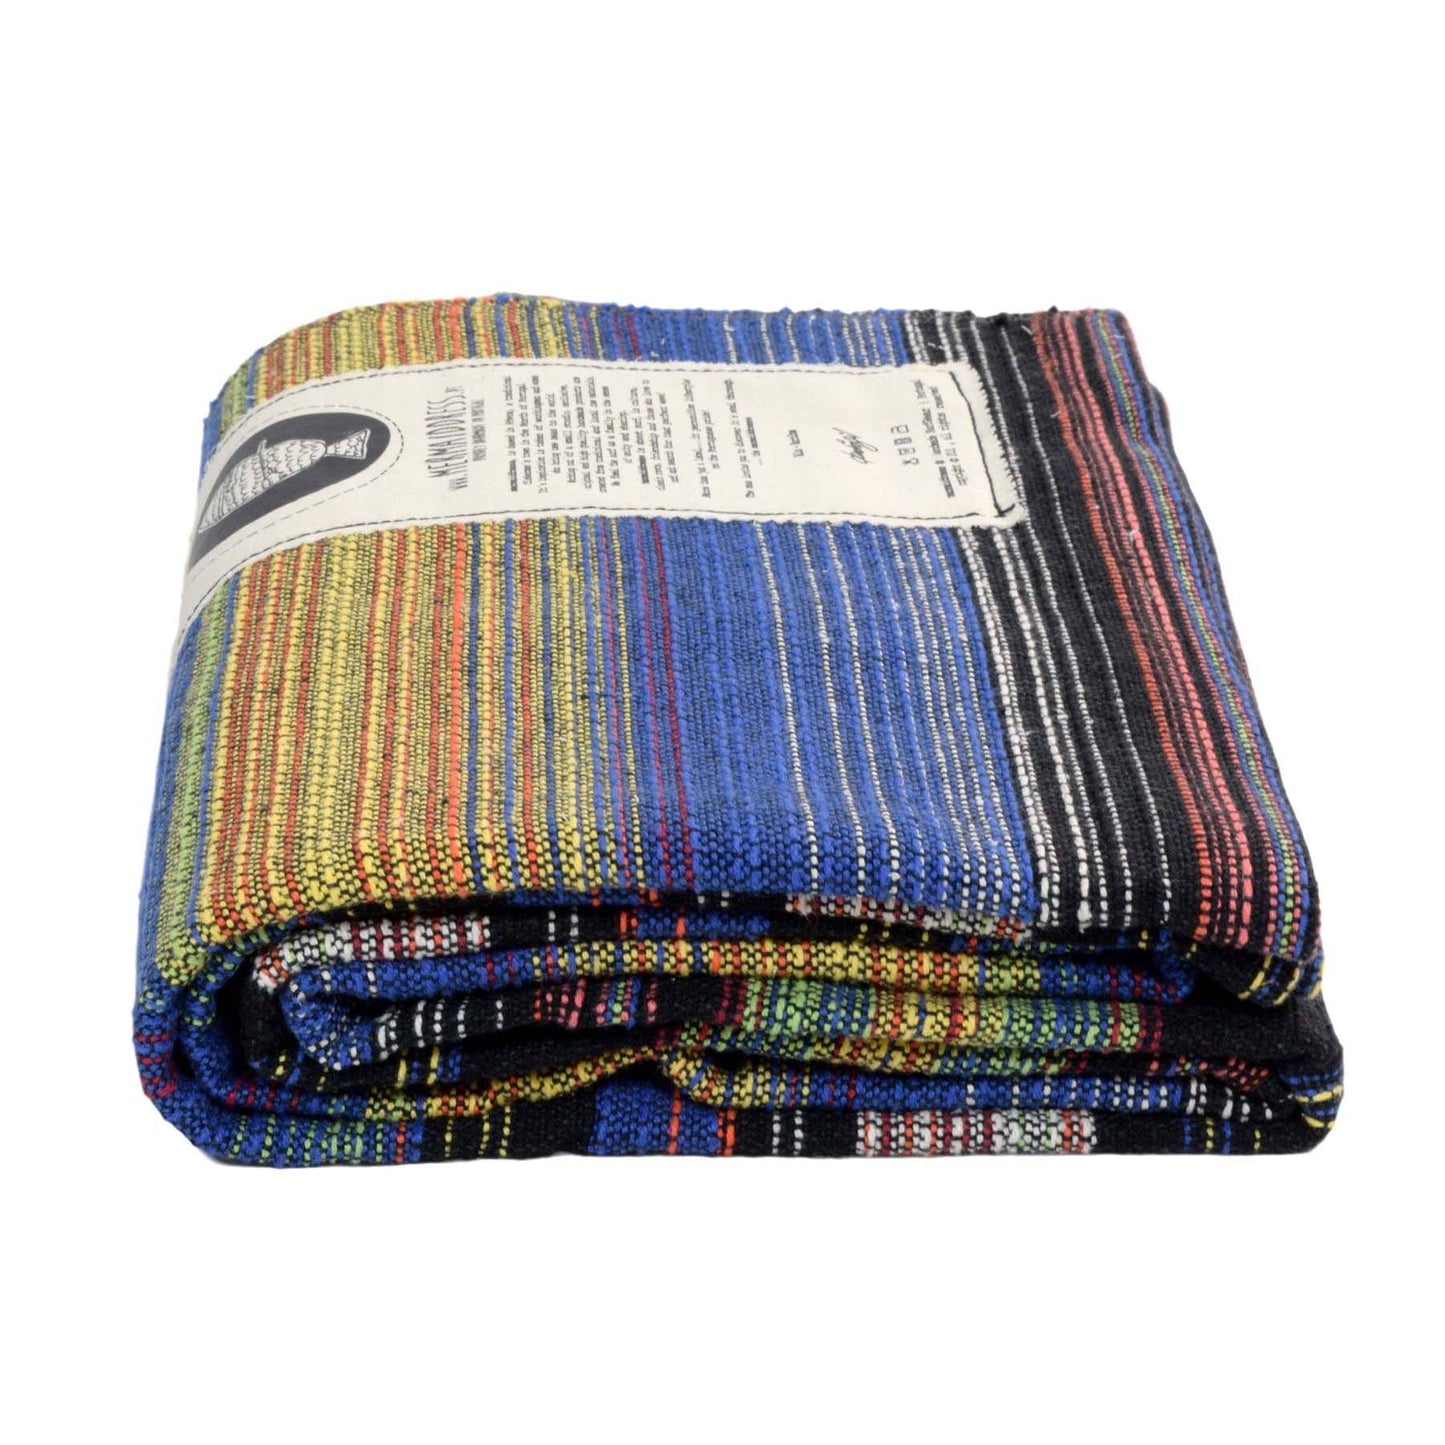 Portugese Blankets